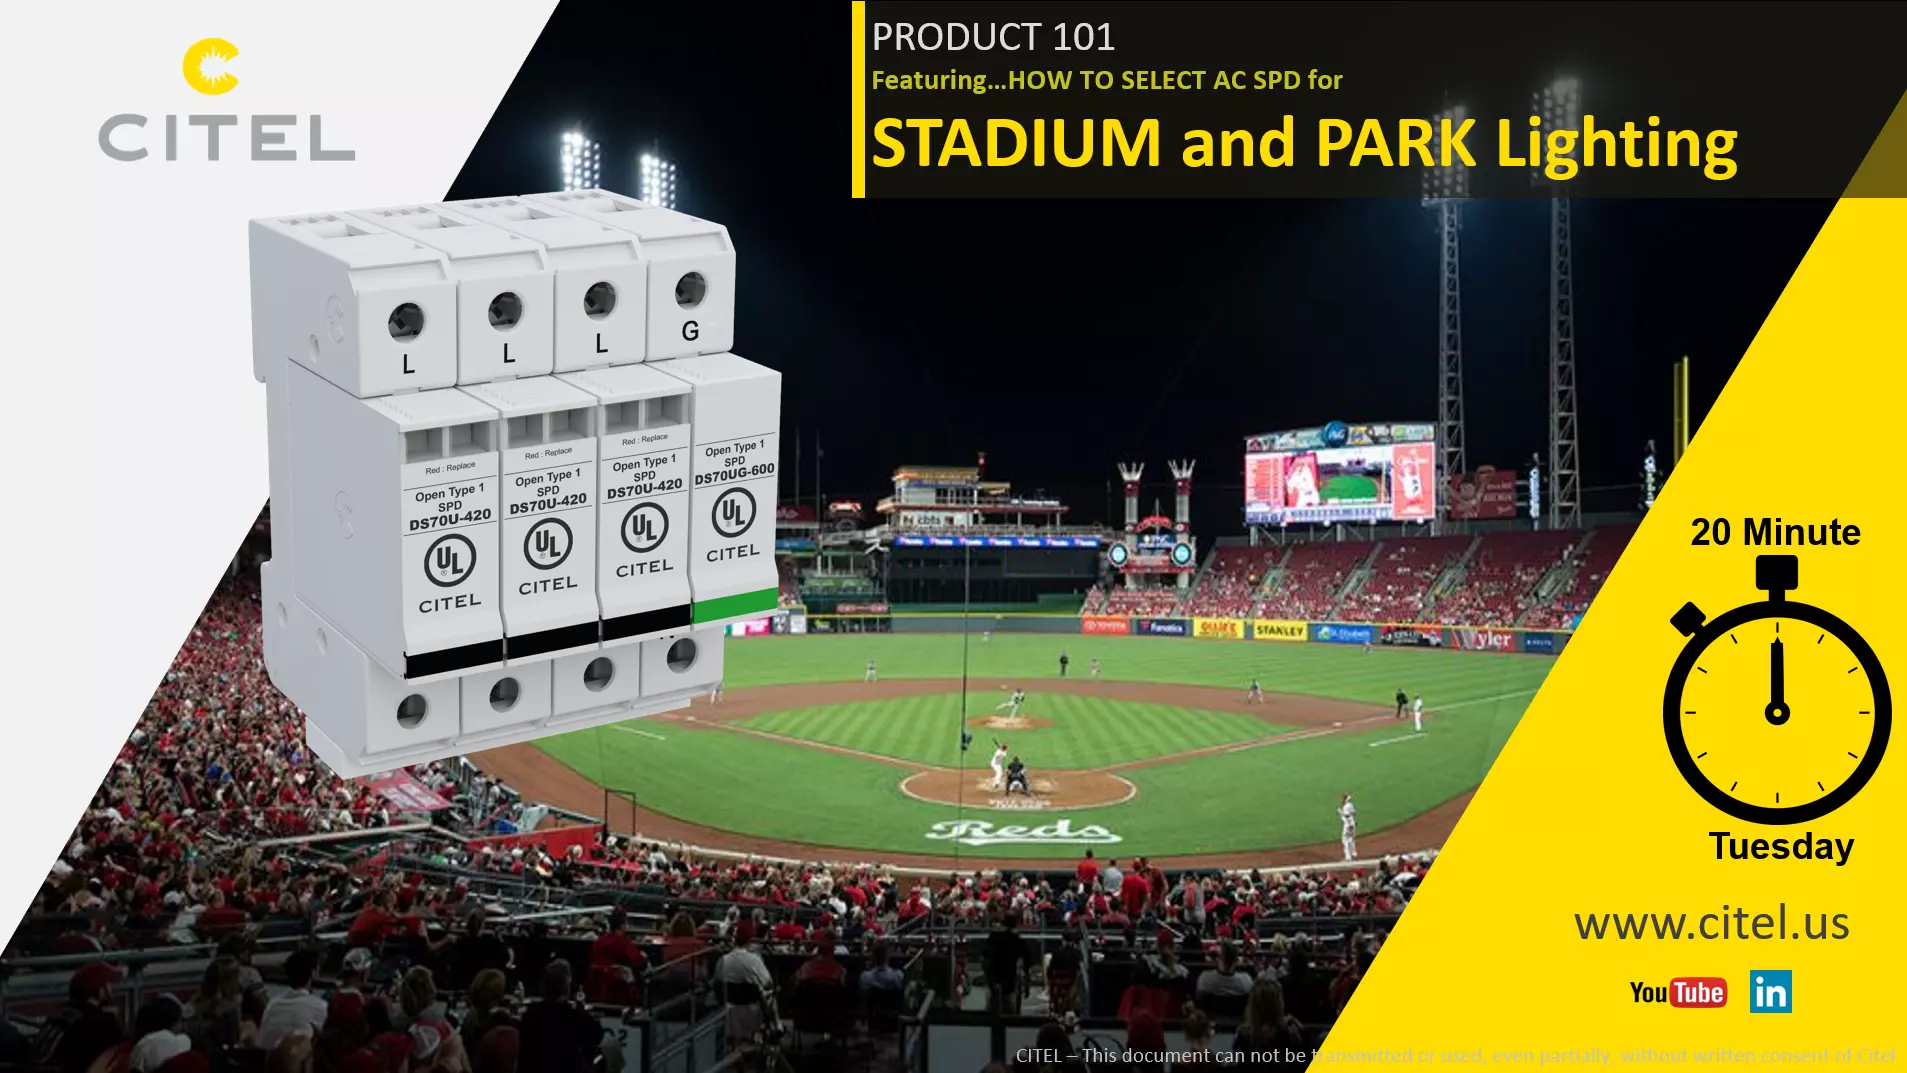 How To Select AC SPD for Stadium and Park Lighting